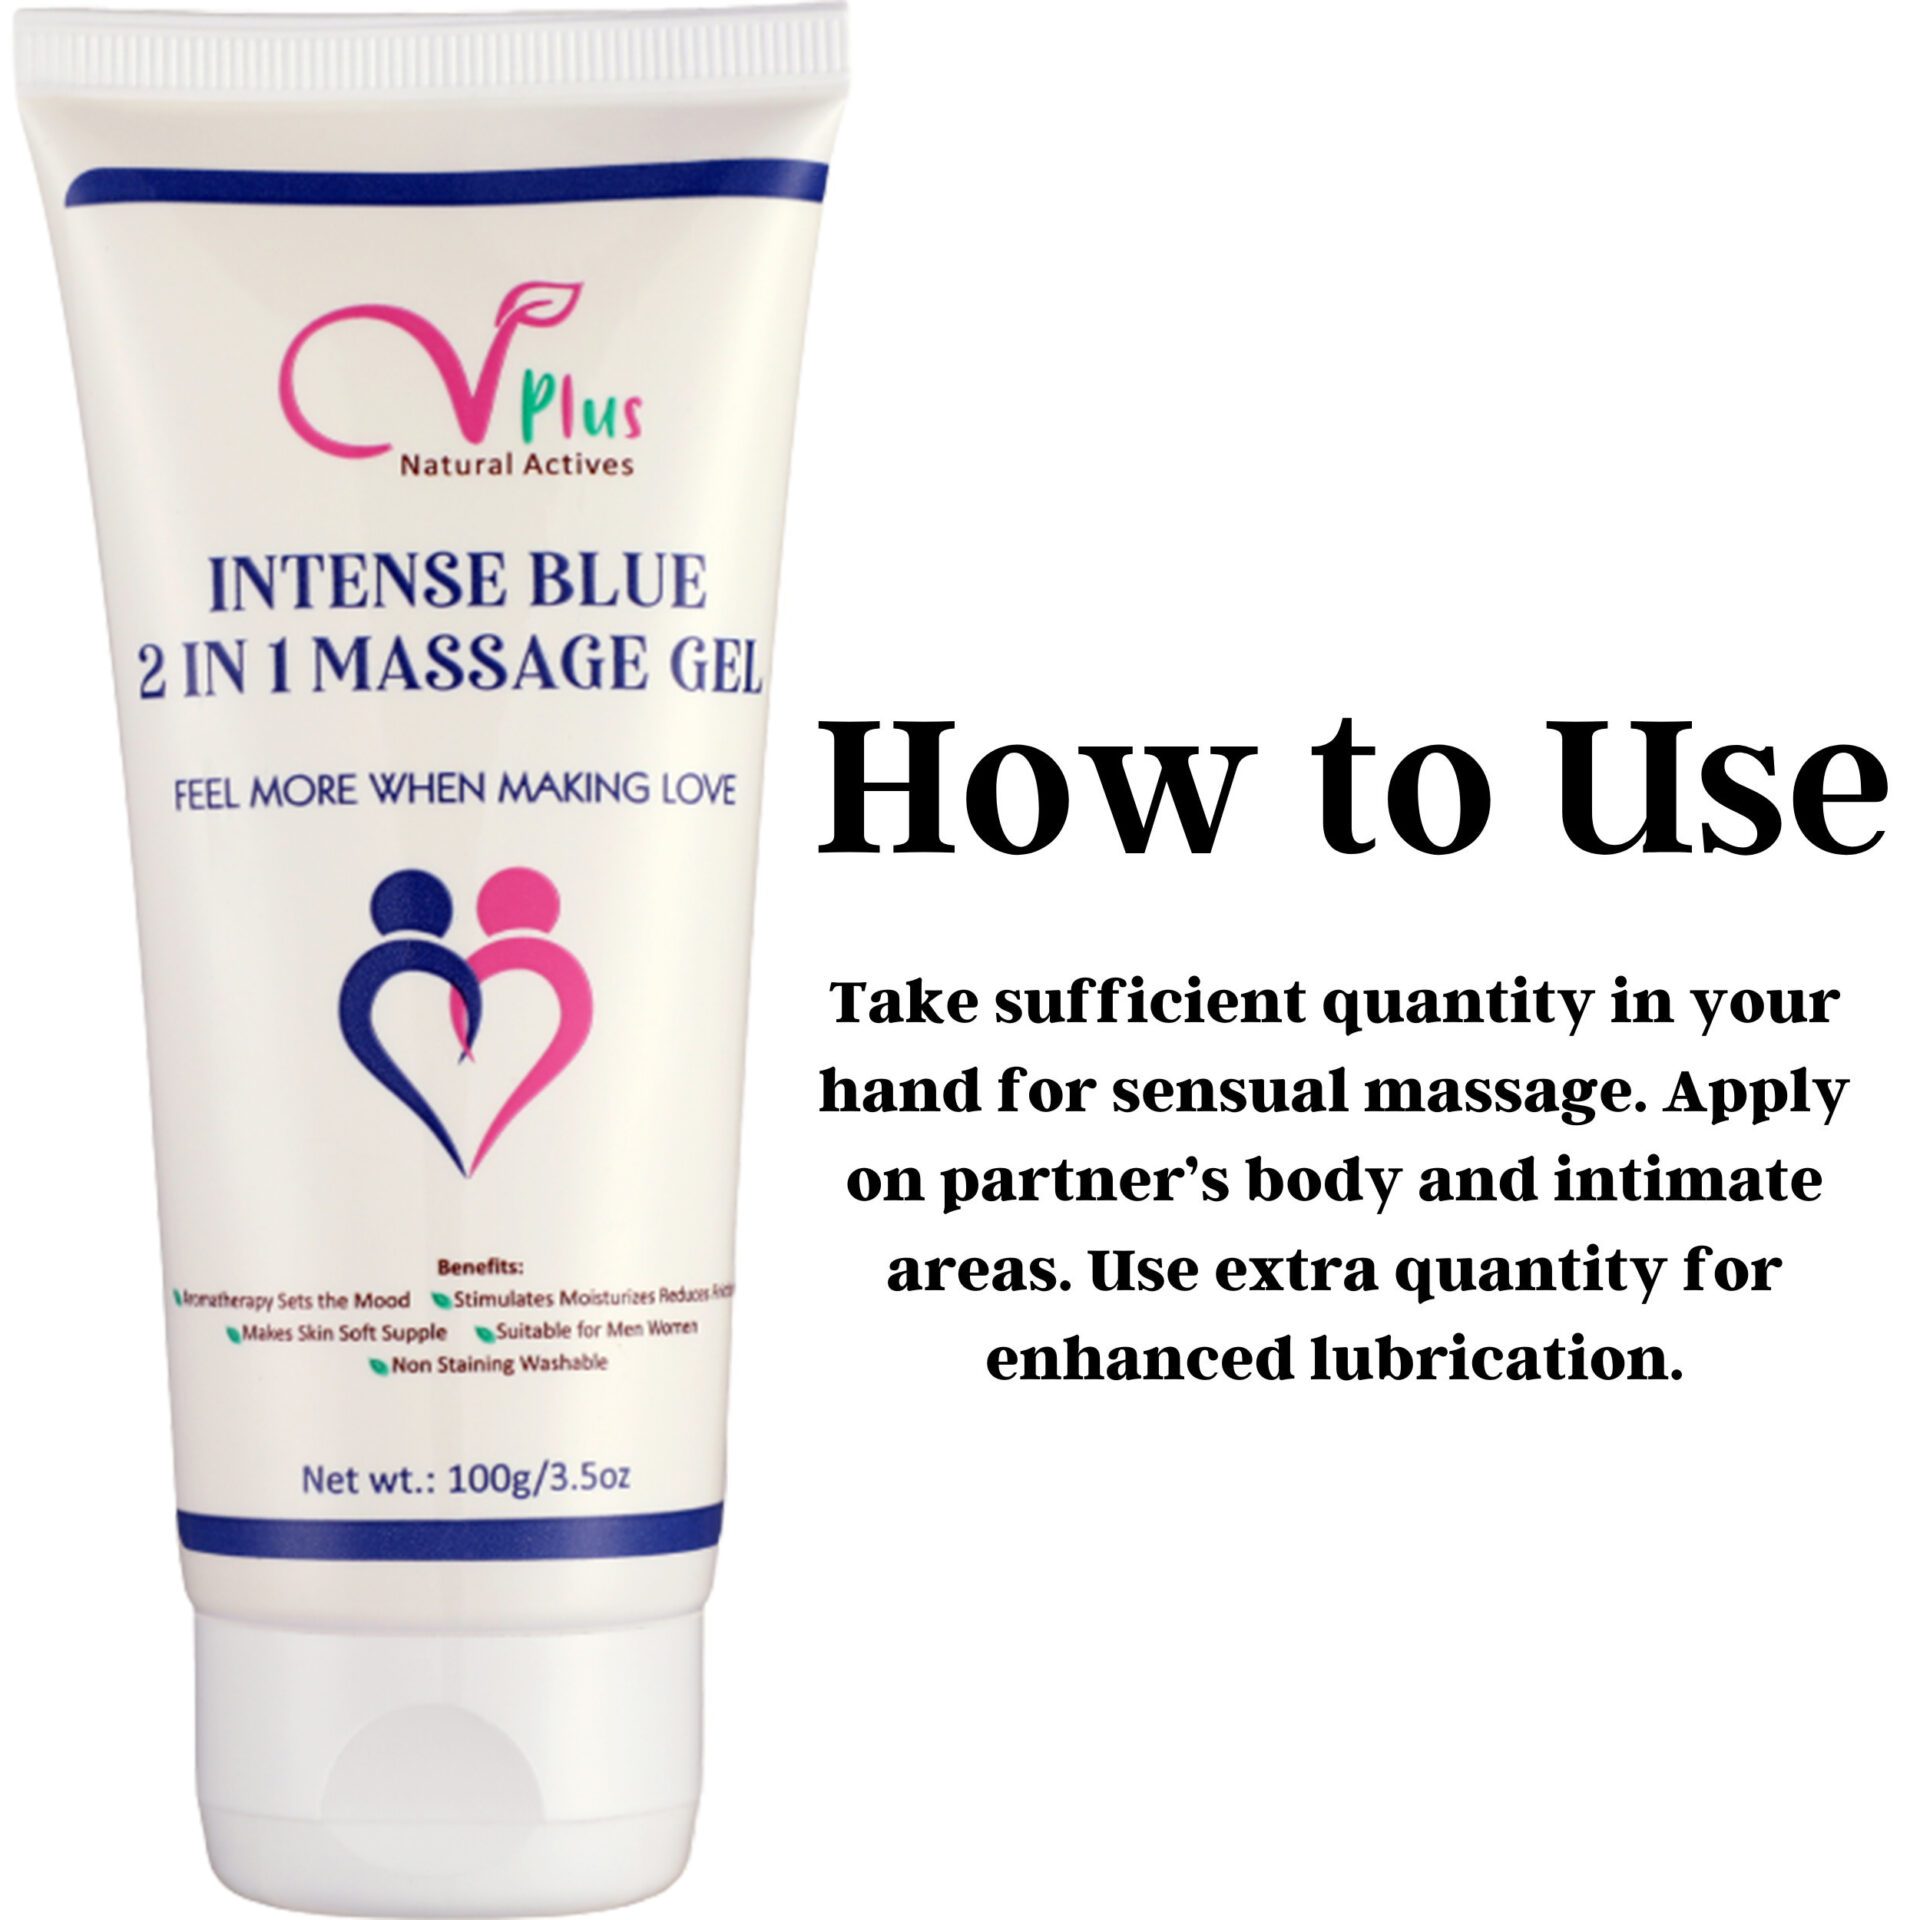 How to use Intense Blue 2 In 1 Massage Gel